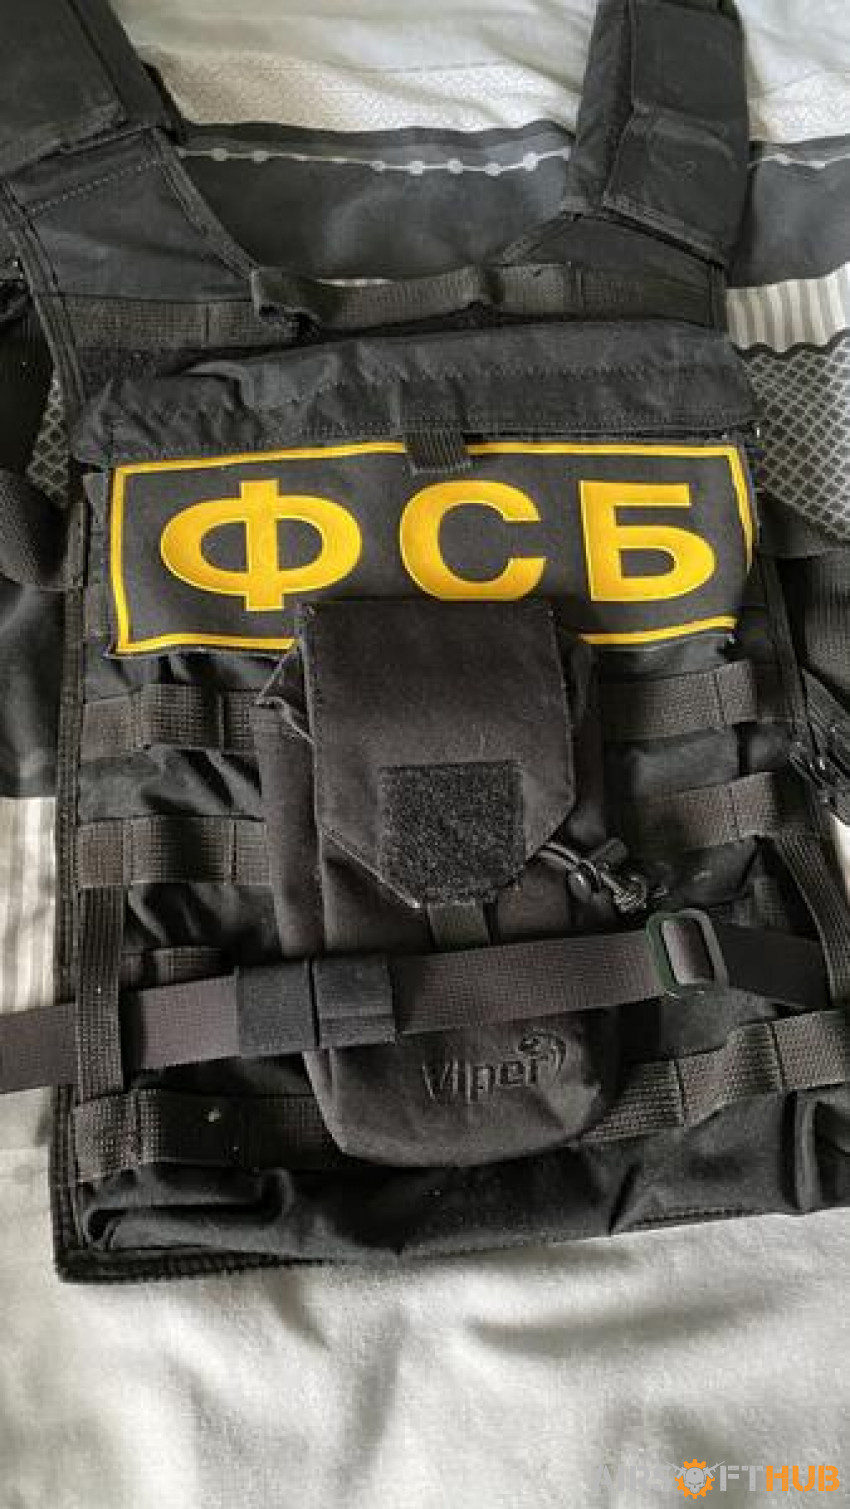 ANA+ SSPON chest rig - Used airsoft equipment